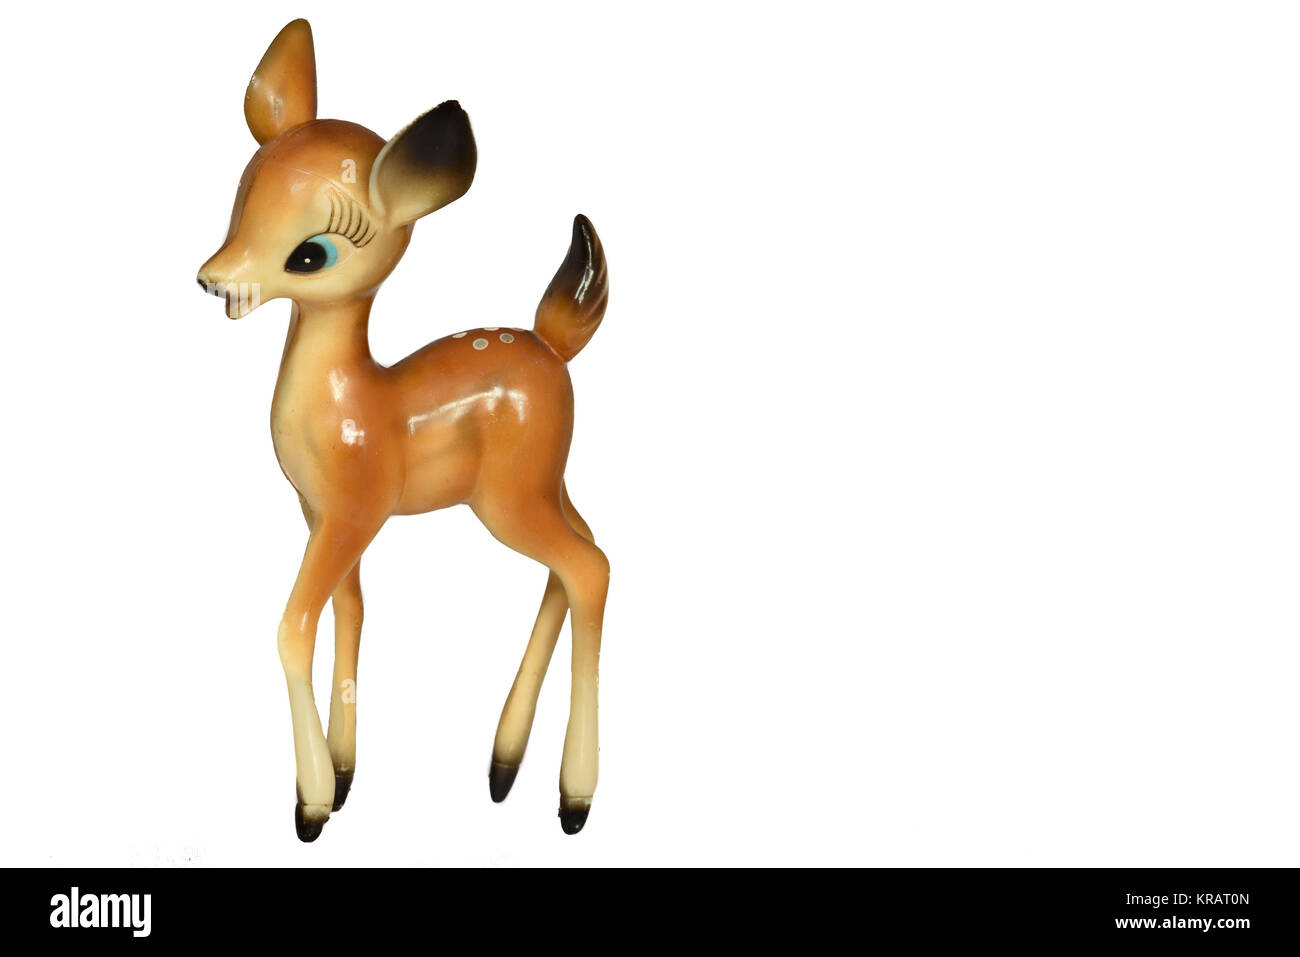 Babycham Reindeer that was used to advertise the popular Babycham drink that was produced from 1953. Stock Photo